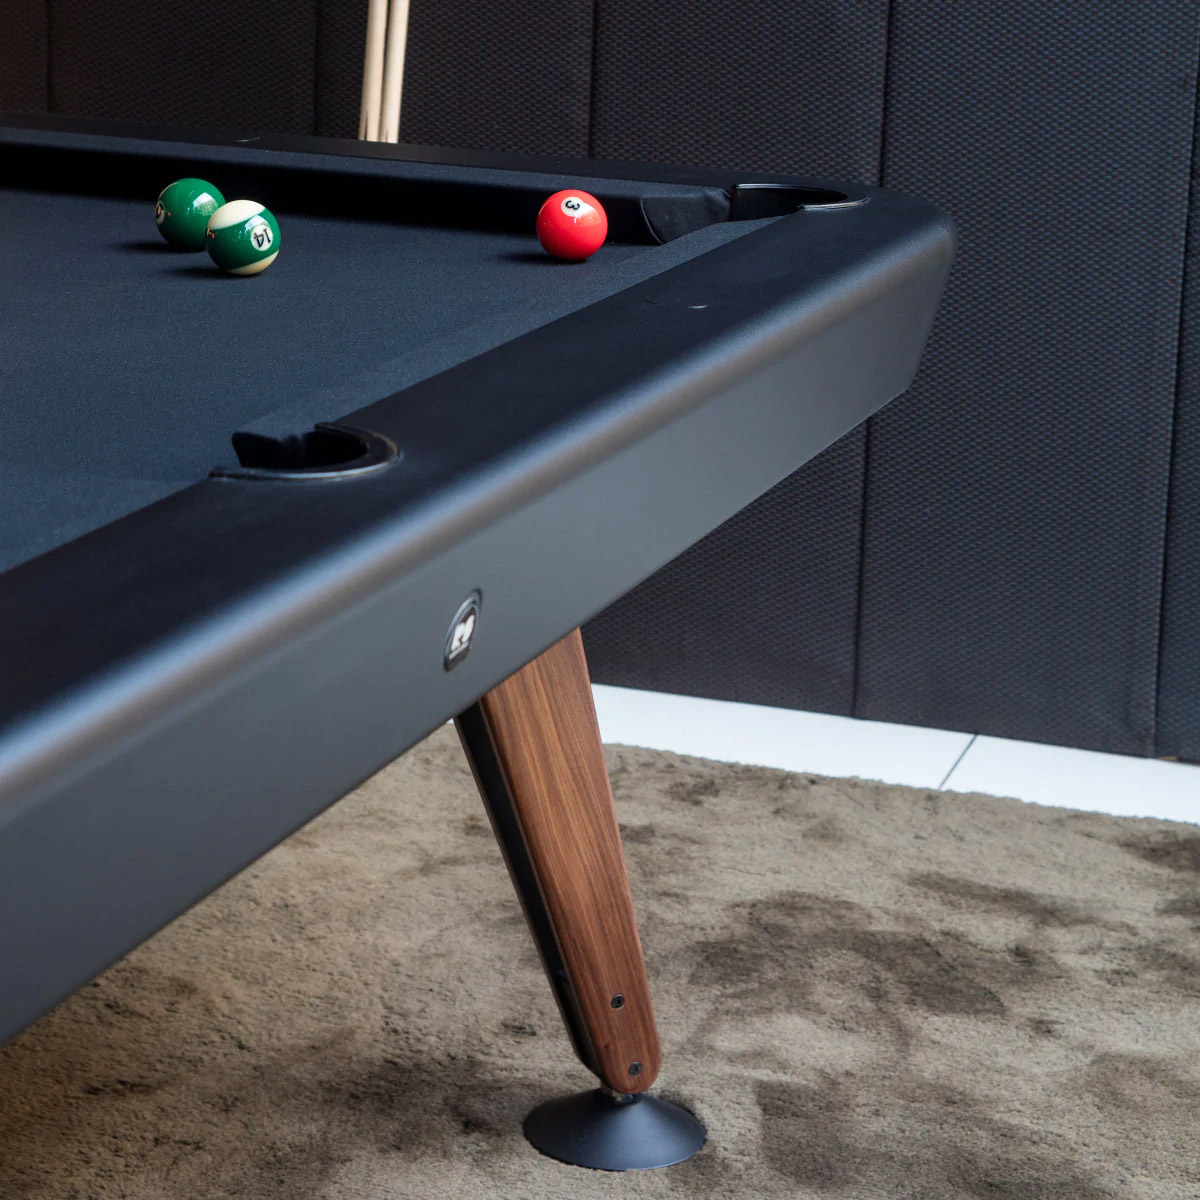 RS Barcelona Diagonal American Pool Table - 7ft, 8ft | Home Leisure Direct